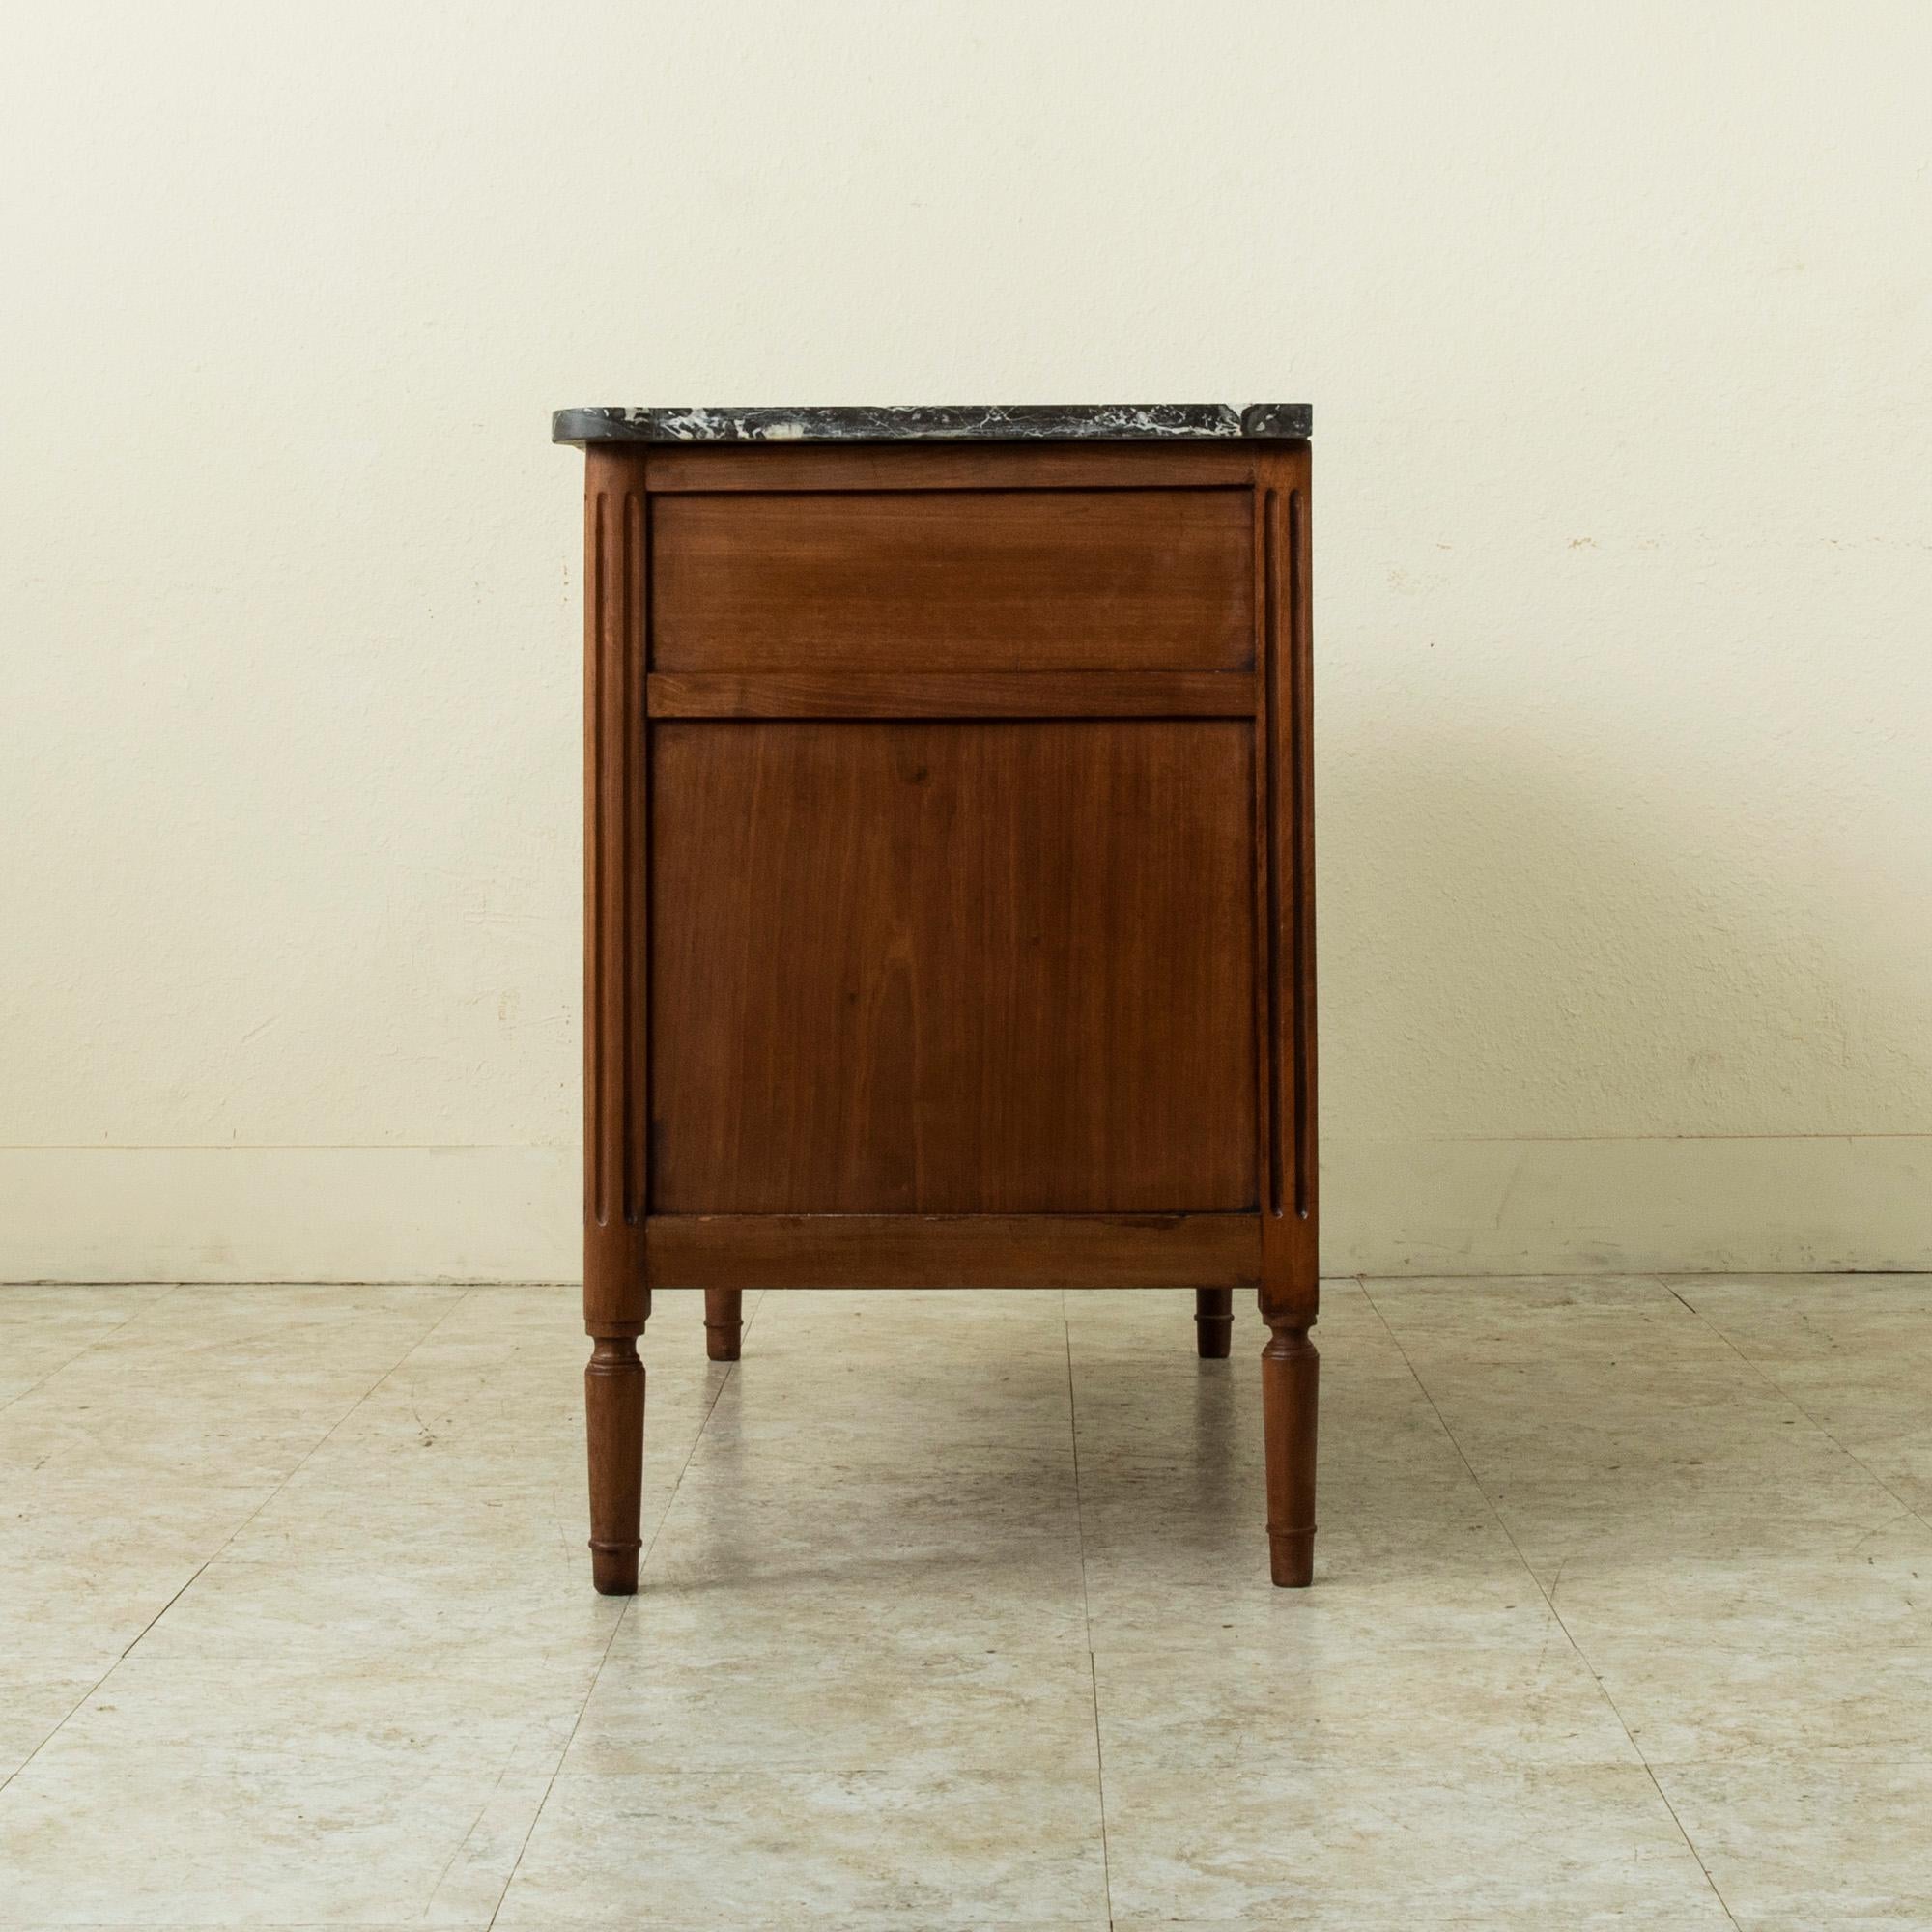 Early 20th Century French Louis XVI Style Mahogany Commode or Chest with Marble Top, Bronze C. 1900